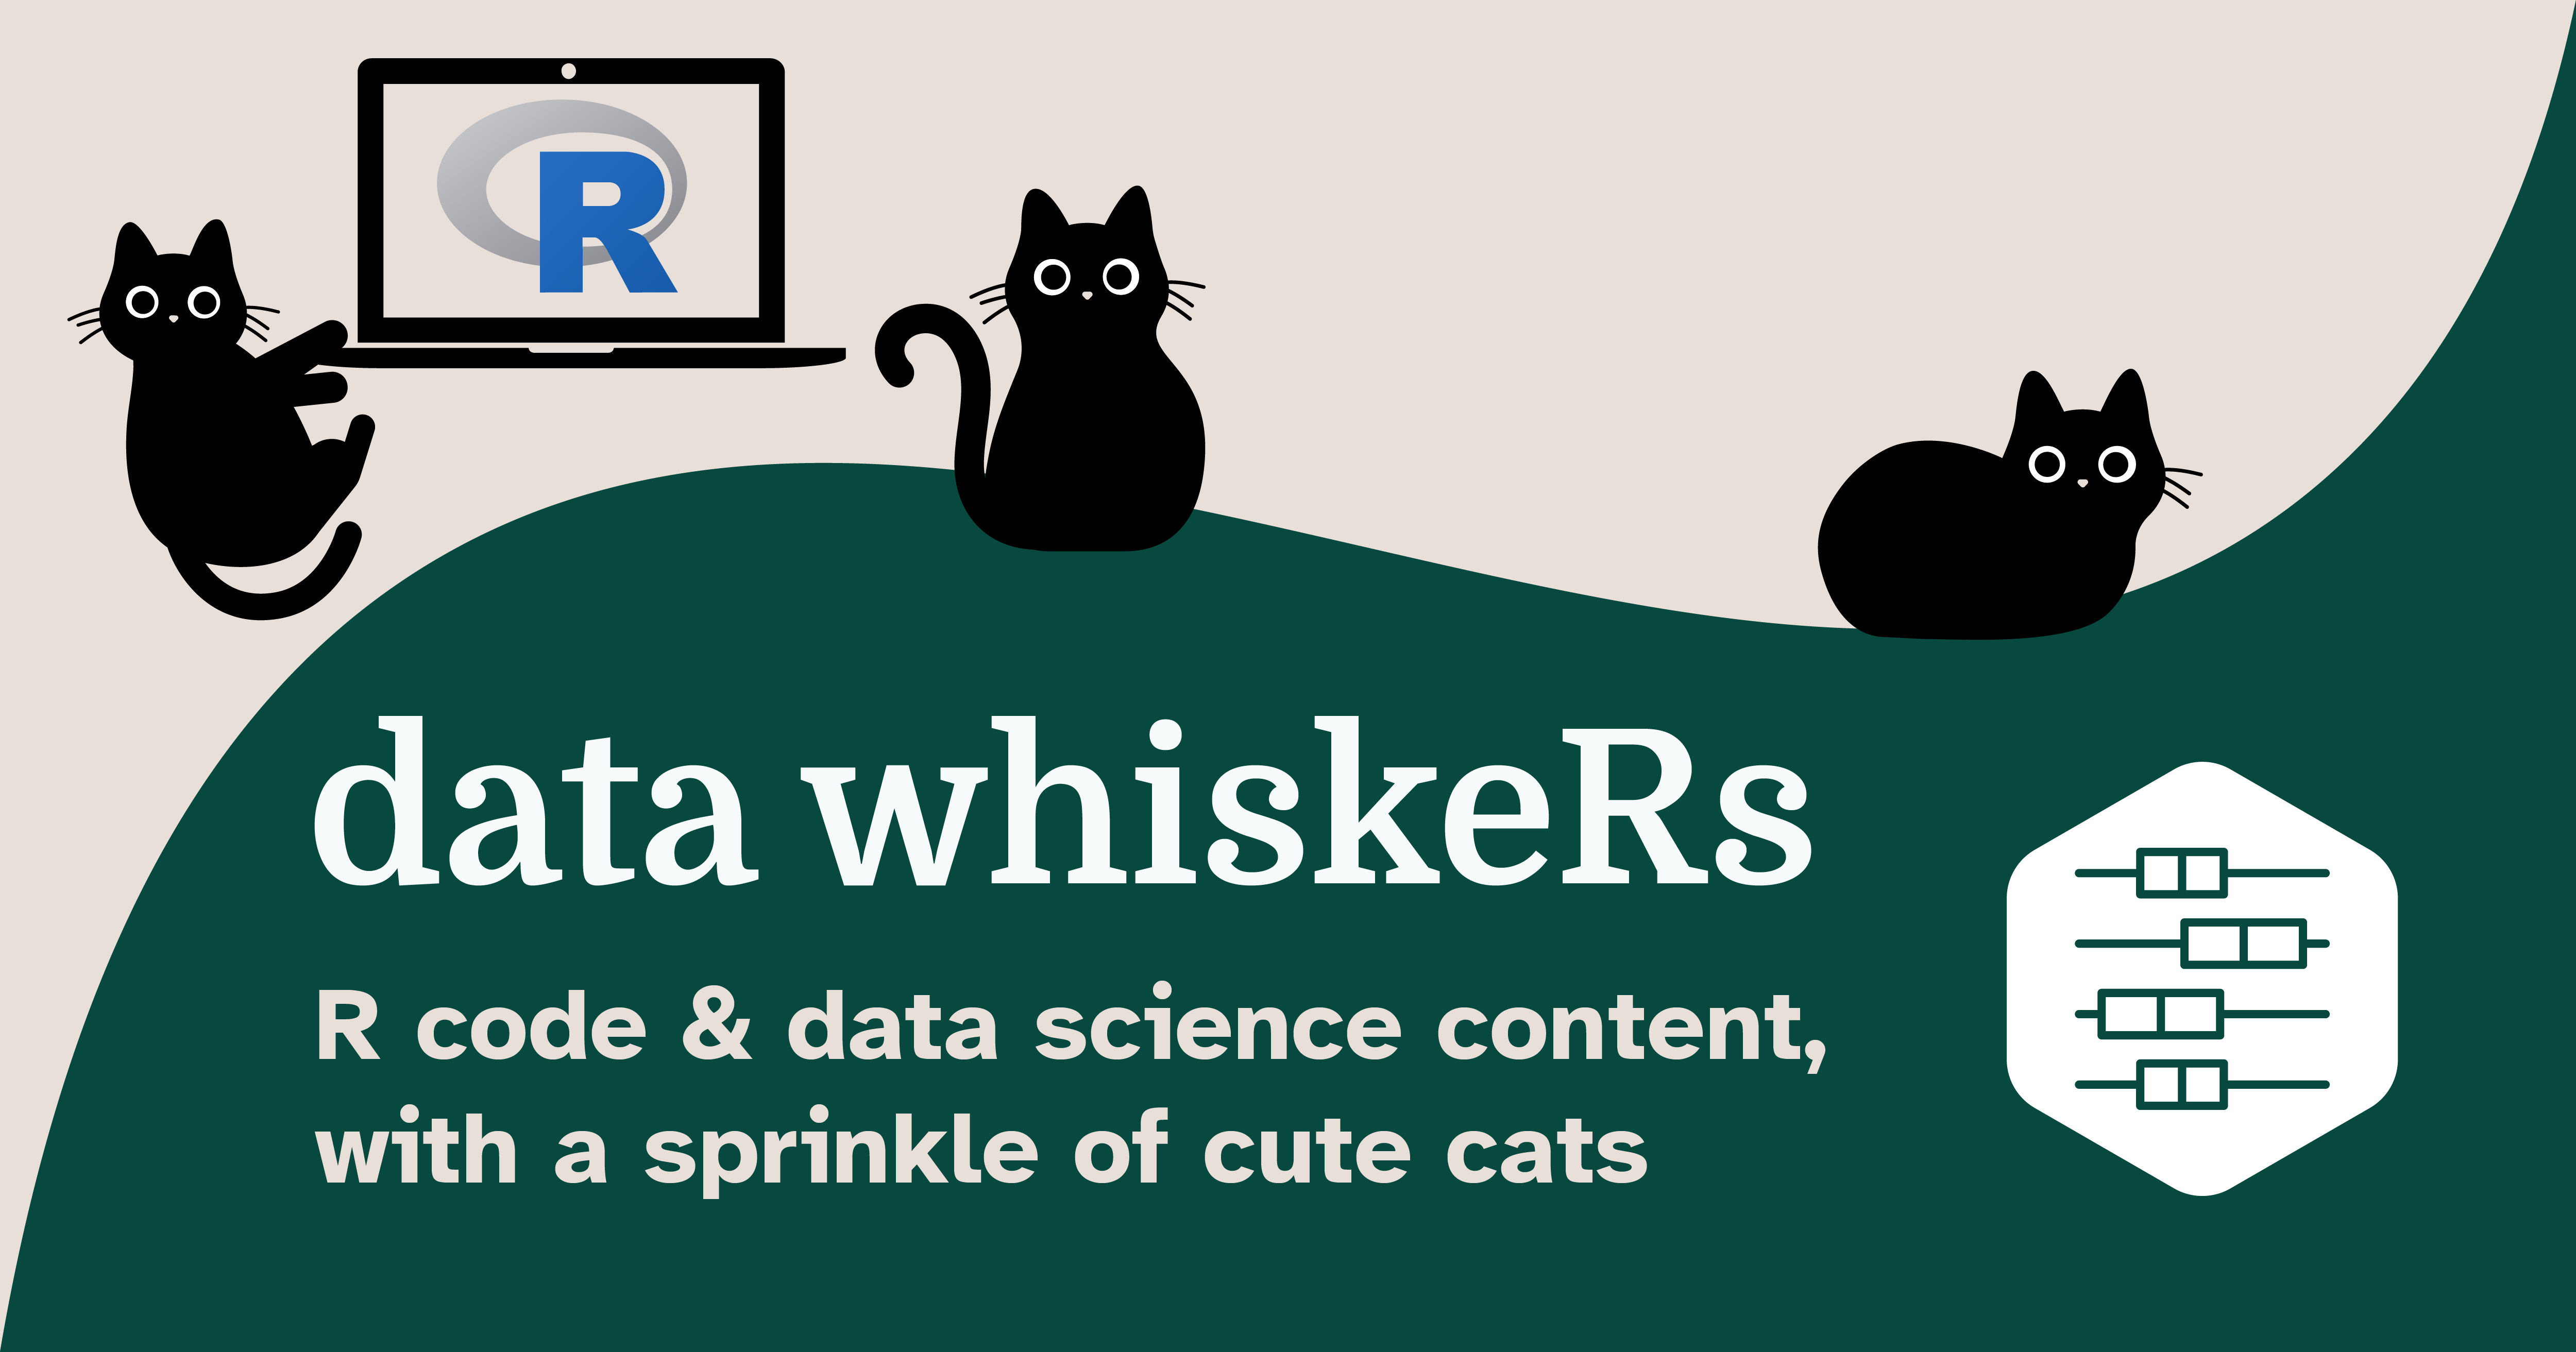 Thumbnail for the data whiskeRs blog. Dark teal color with white text reading data whiskeRs: R code & data science content with a sprinkle of cute cats.